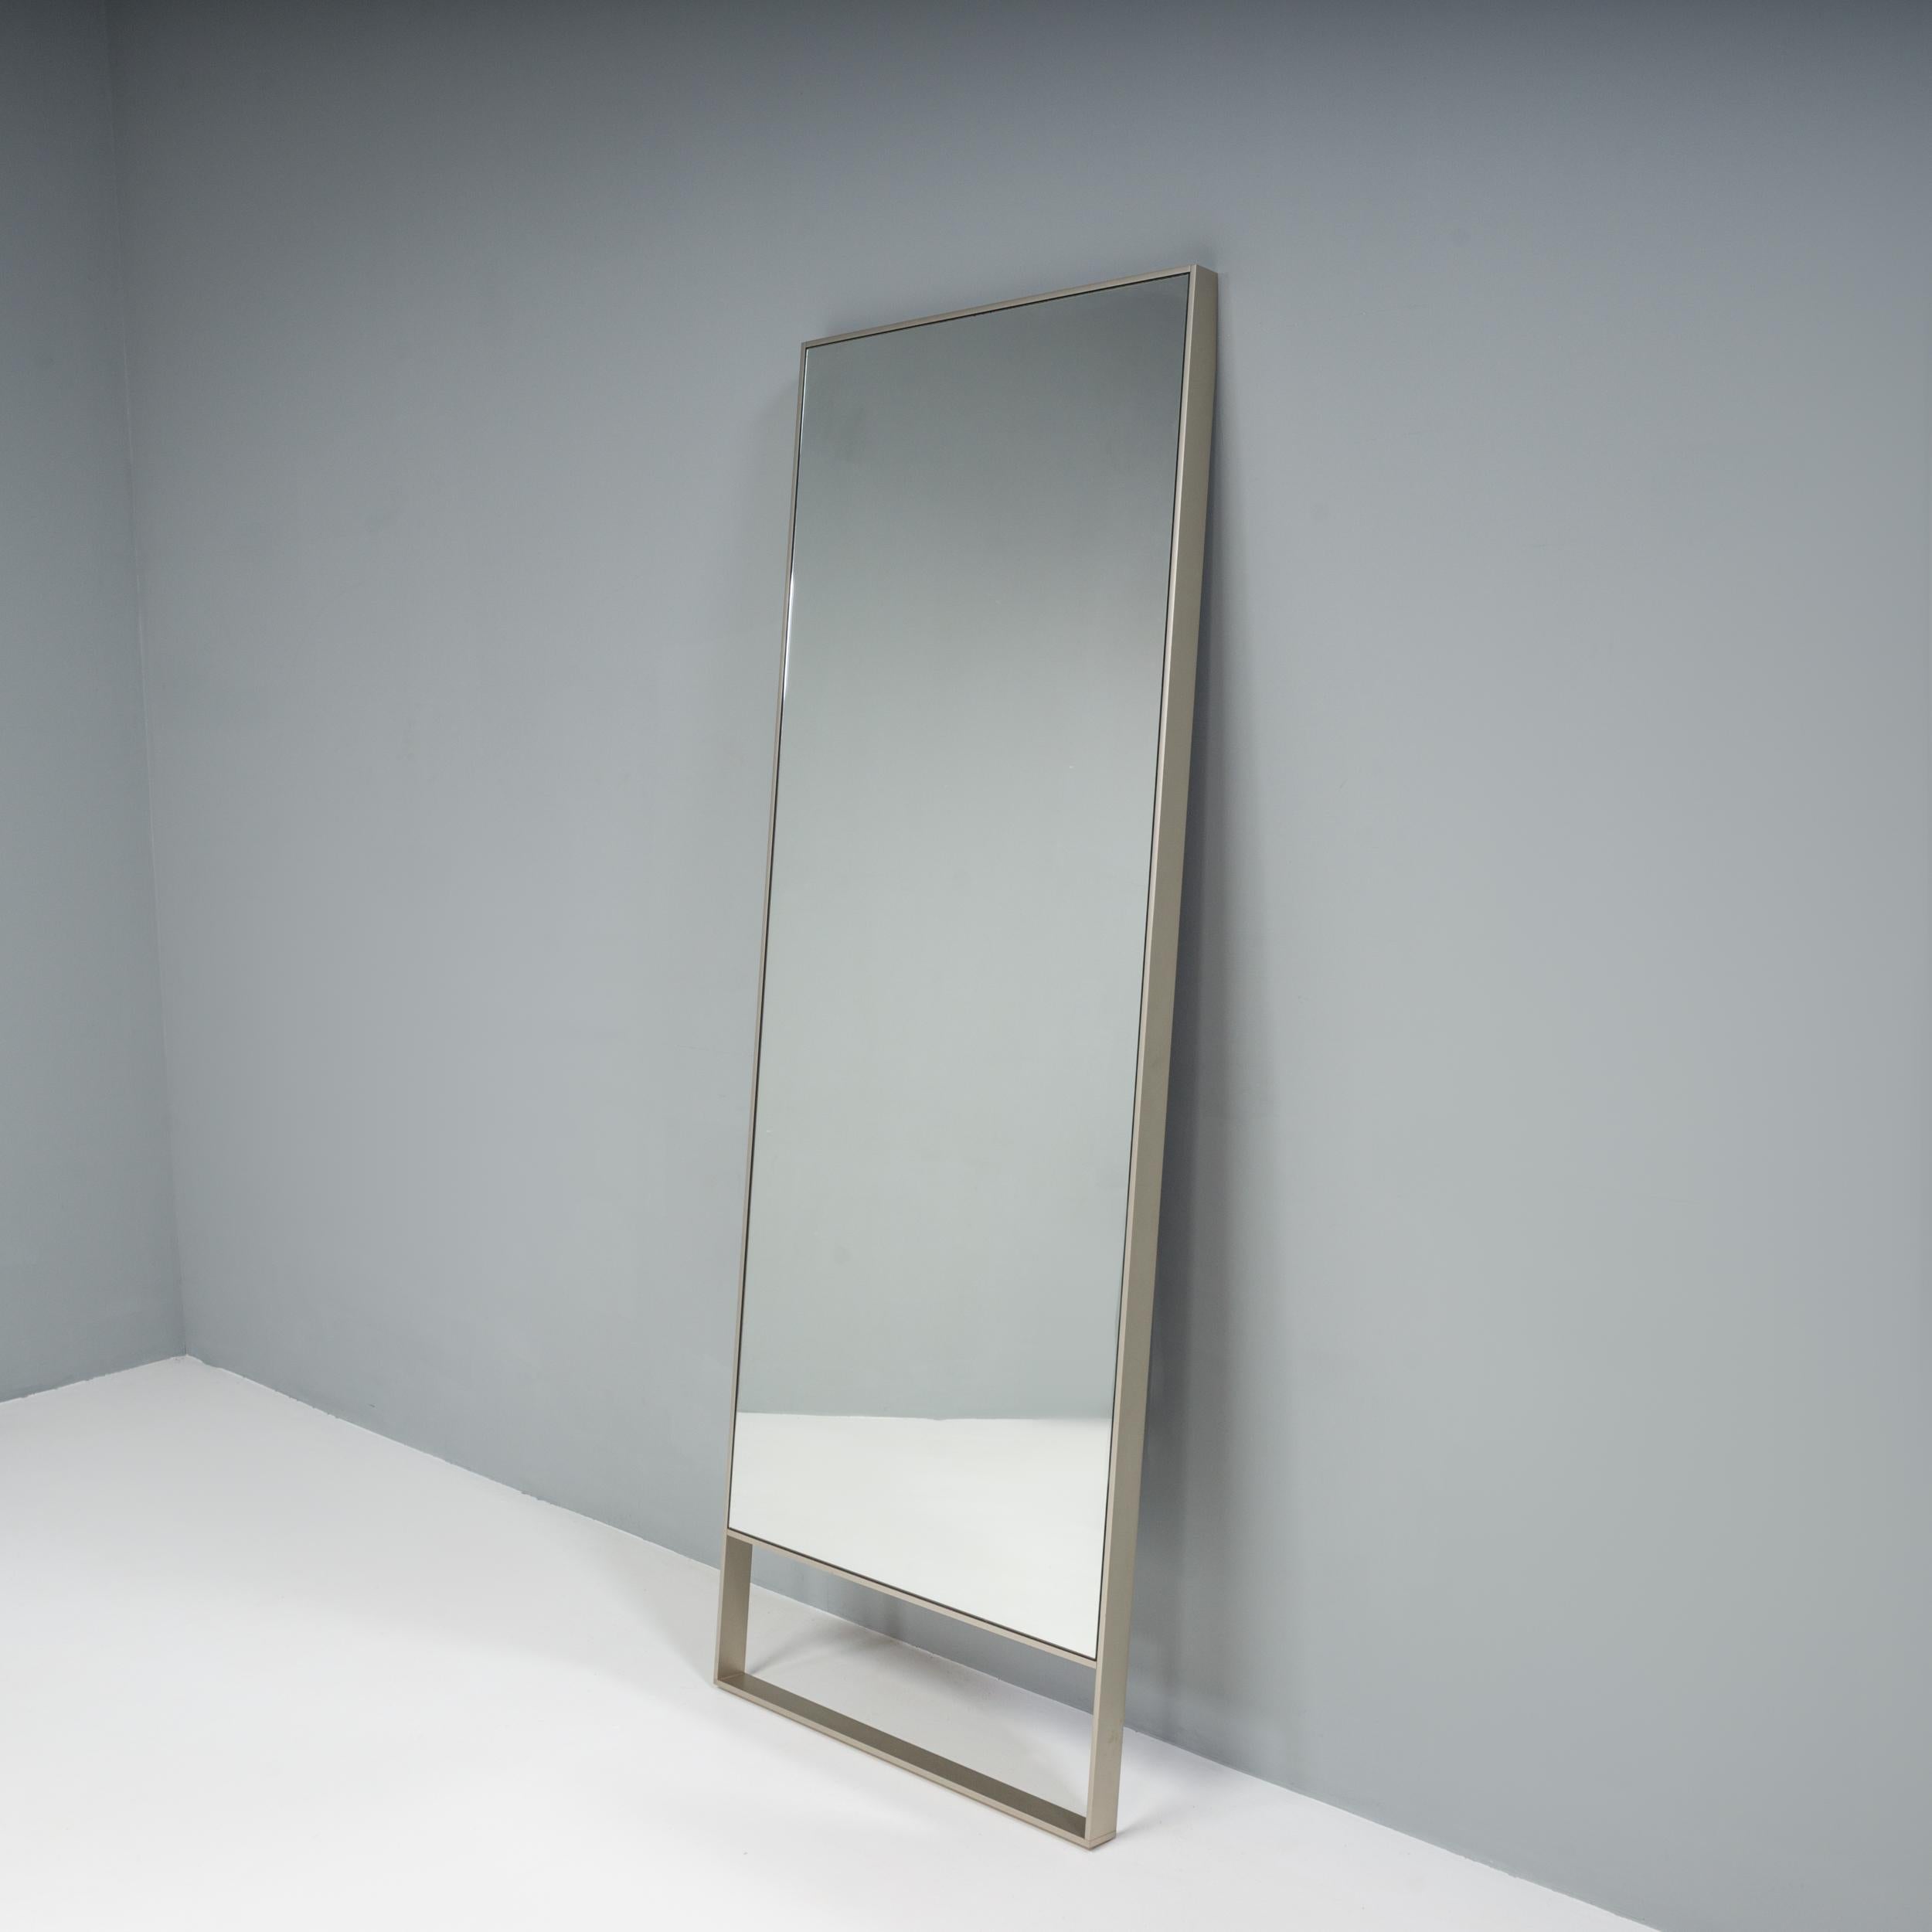 Originally designed by Antonio Citterio for Maxalto in 2001, the Psiche wall mirror is both elegant and refined.

The tall, free-standing mirror has an angular frame in a bright chromed finish, while the angled top allows it to lean against a